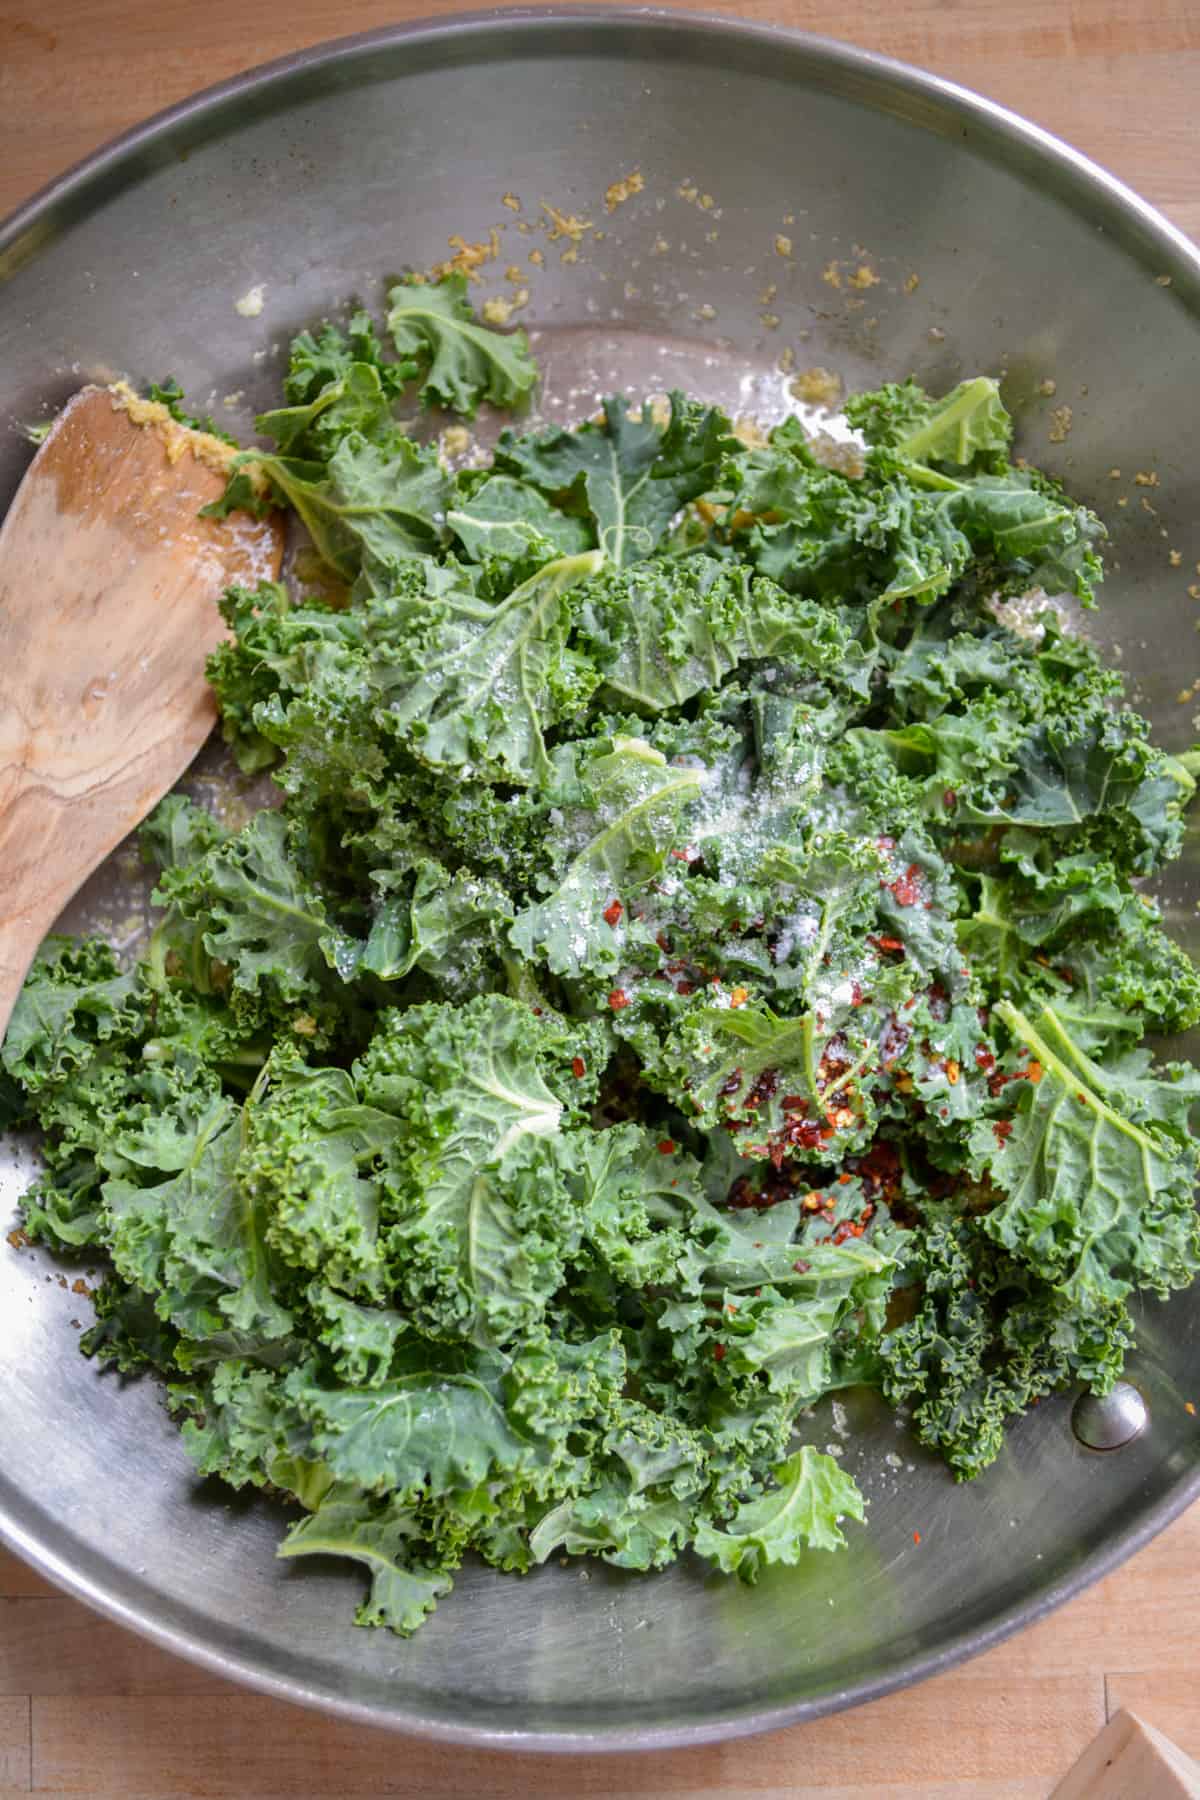 Kale, red pepper flake and salt added into the skillet.